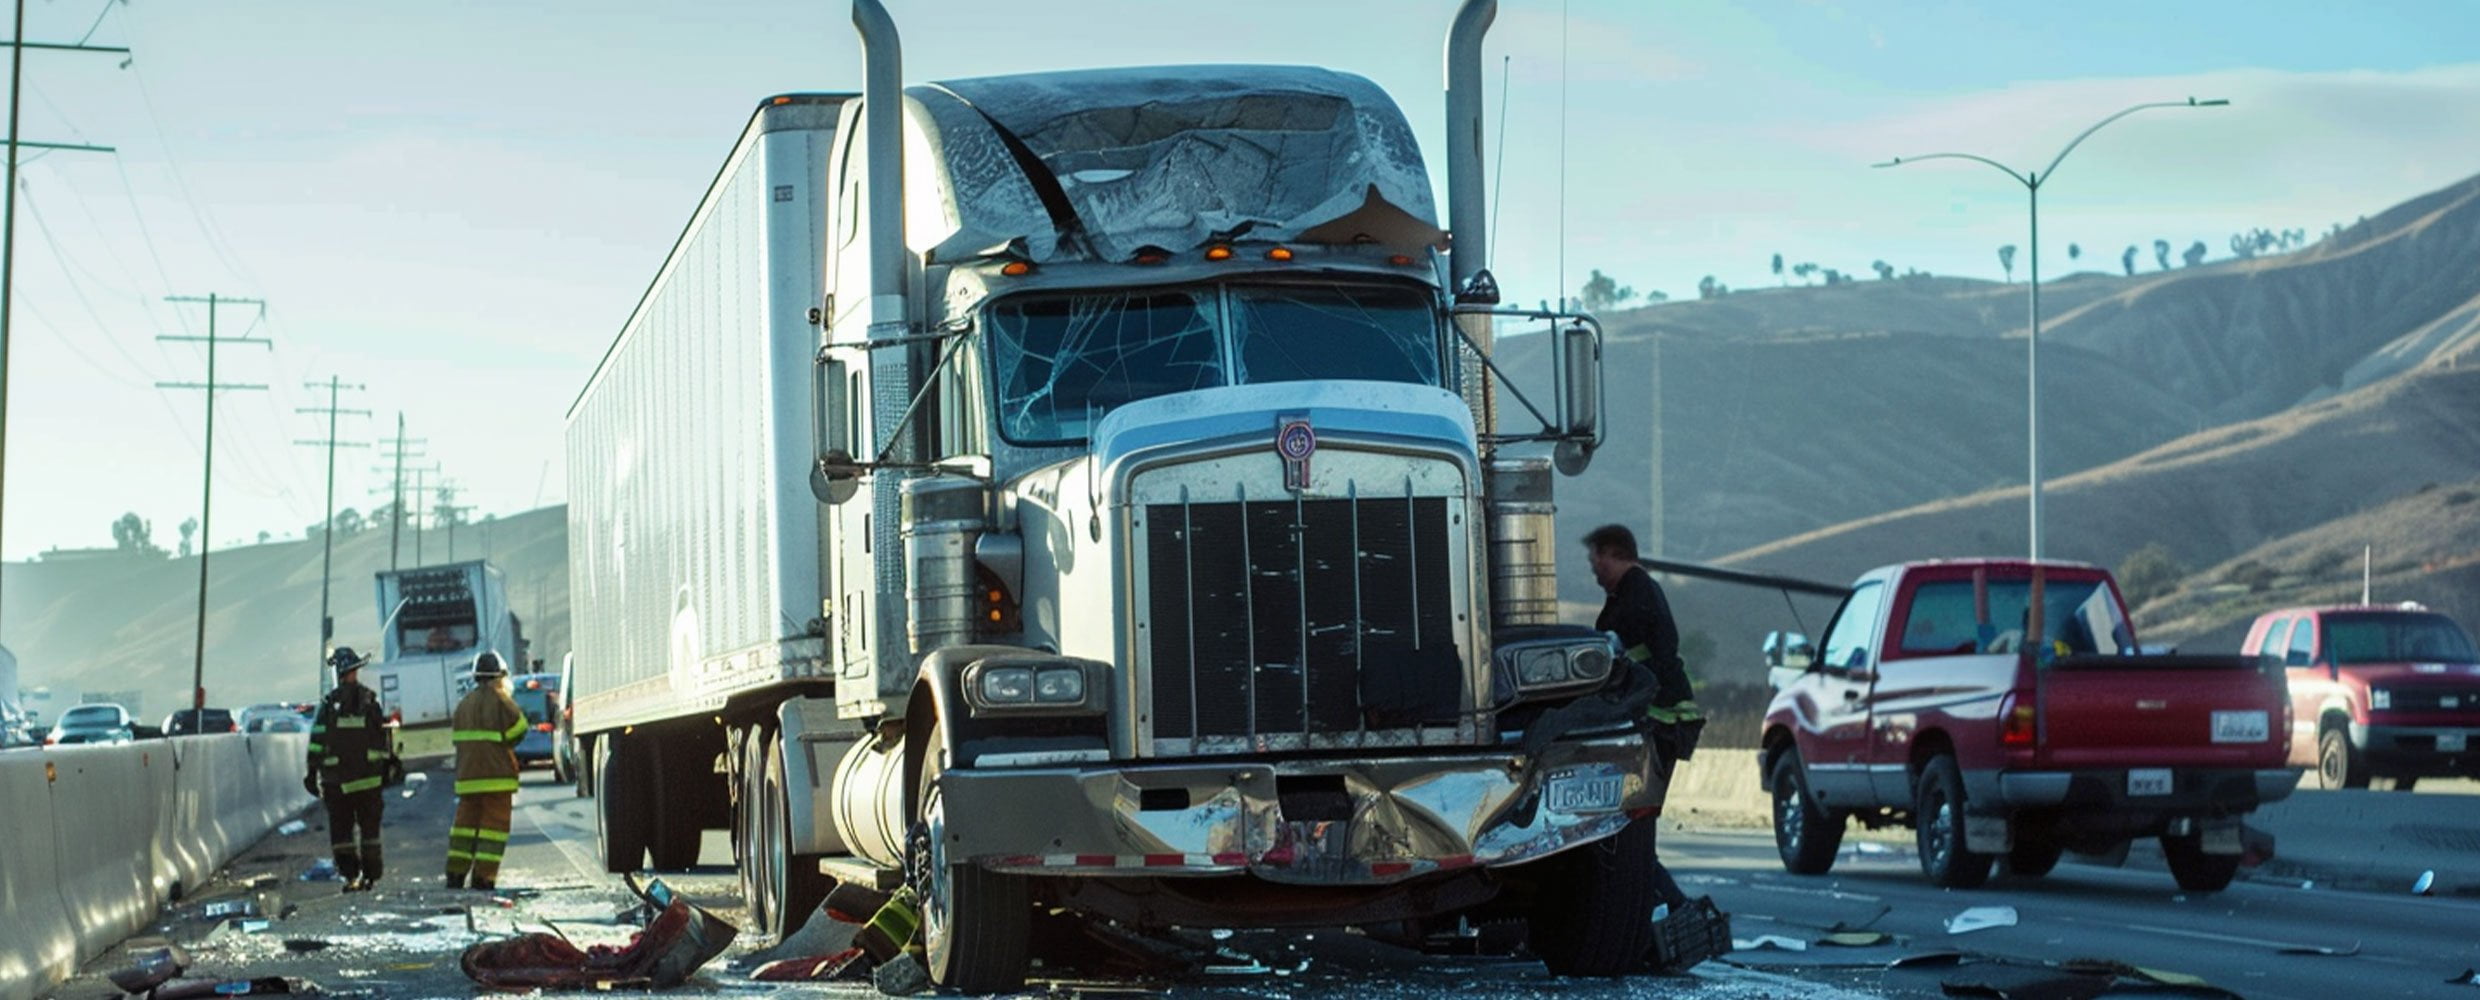 Ontario Truck Accident Lawyer and attorney